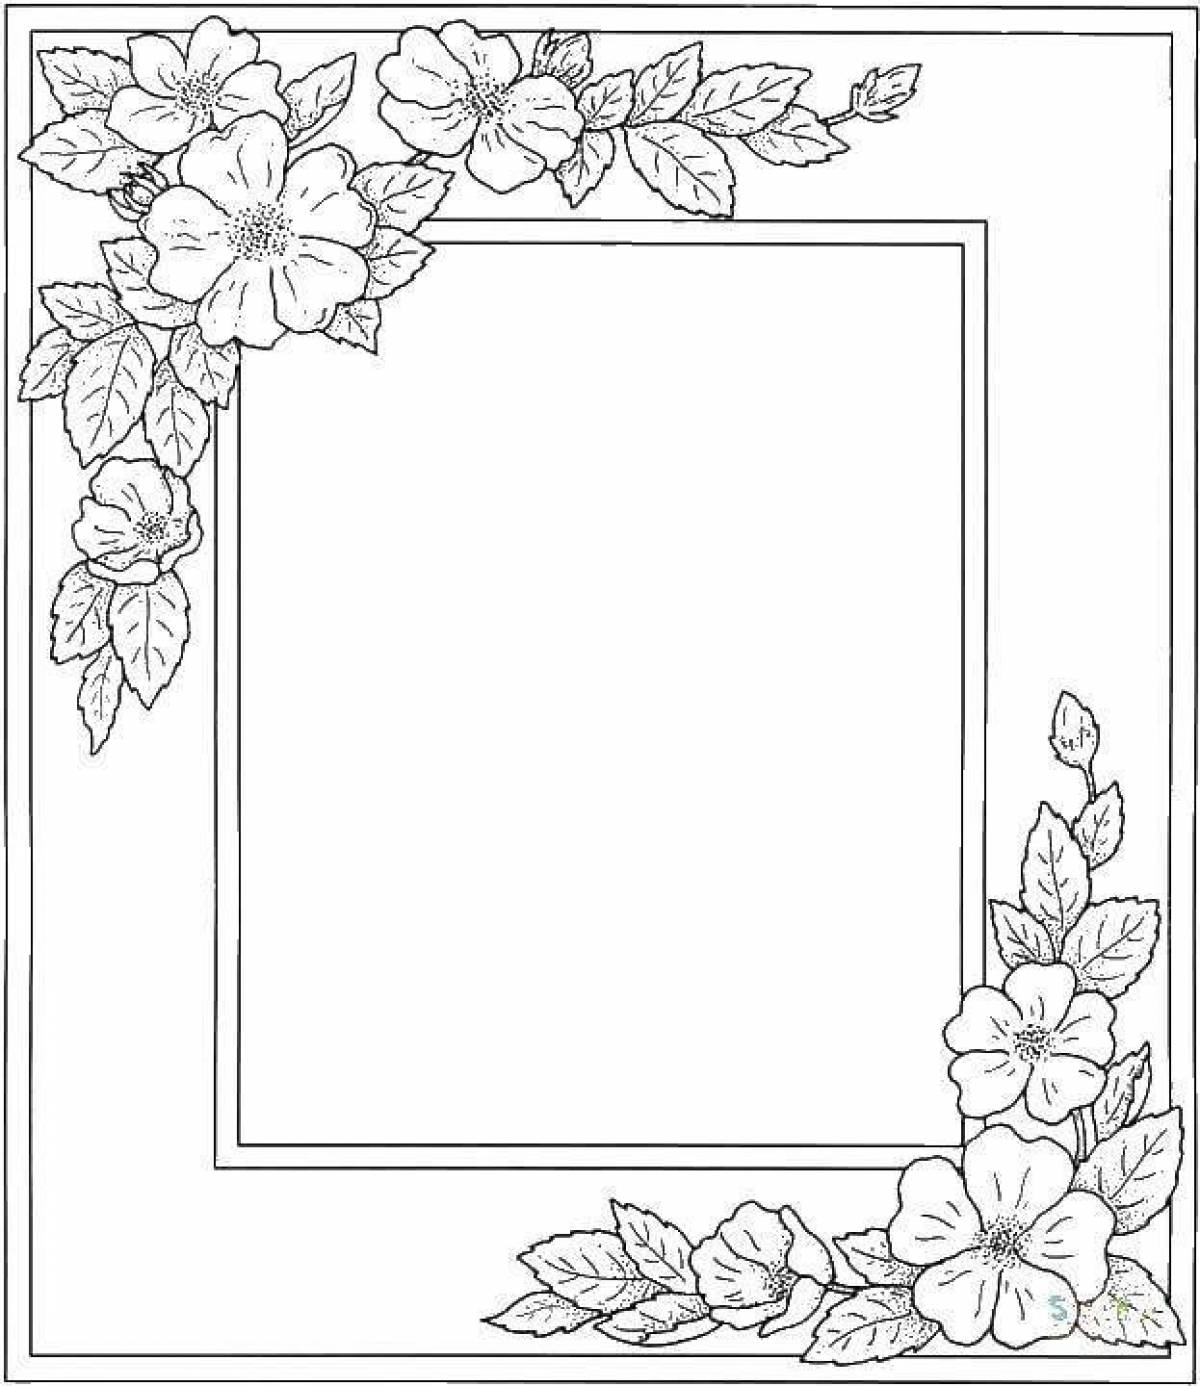 Serene coloring page black and white photo